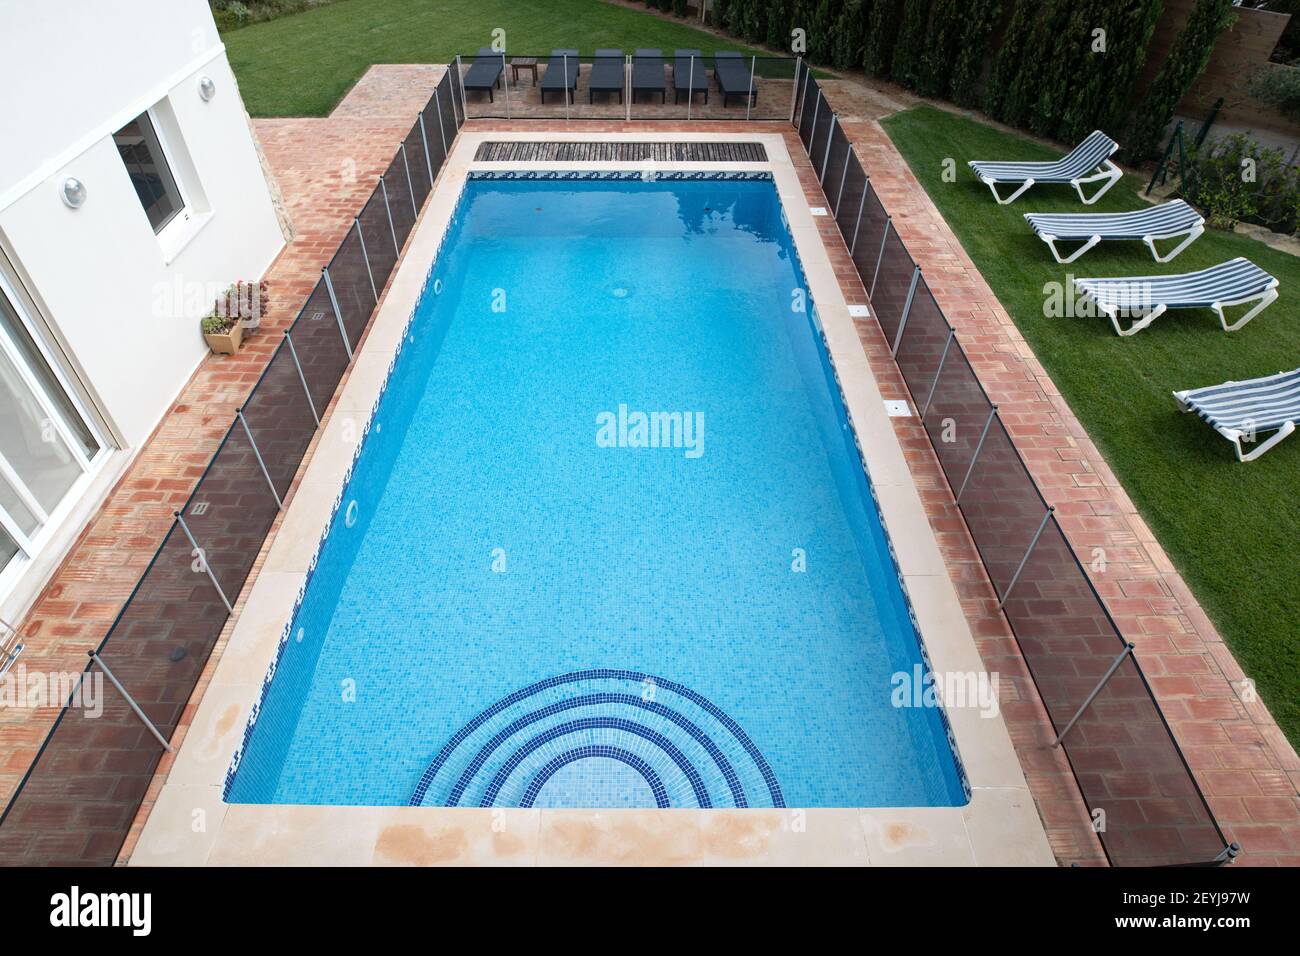 High angle view of a swimming pool with child safety fence around it Stock Photo